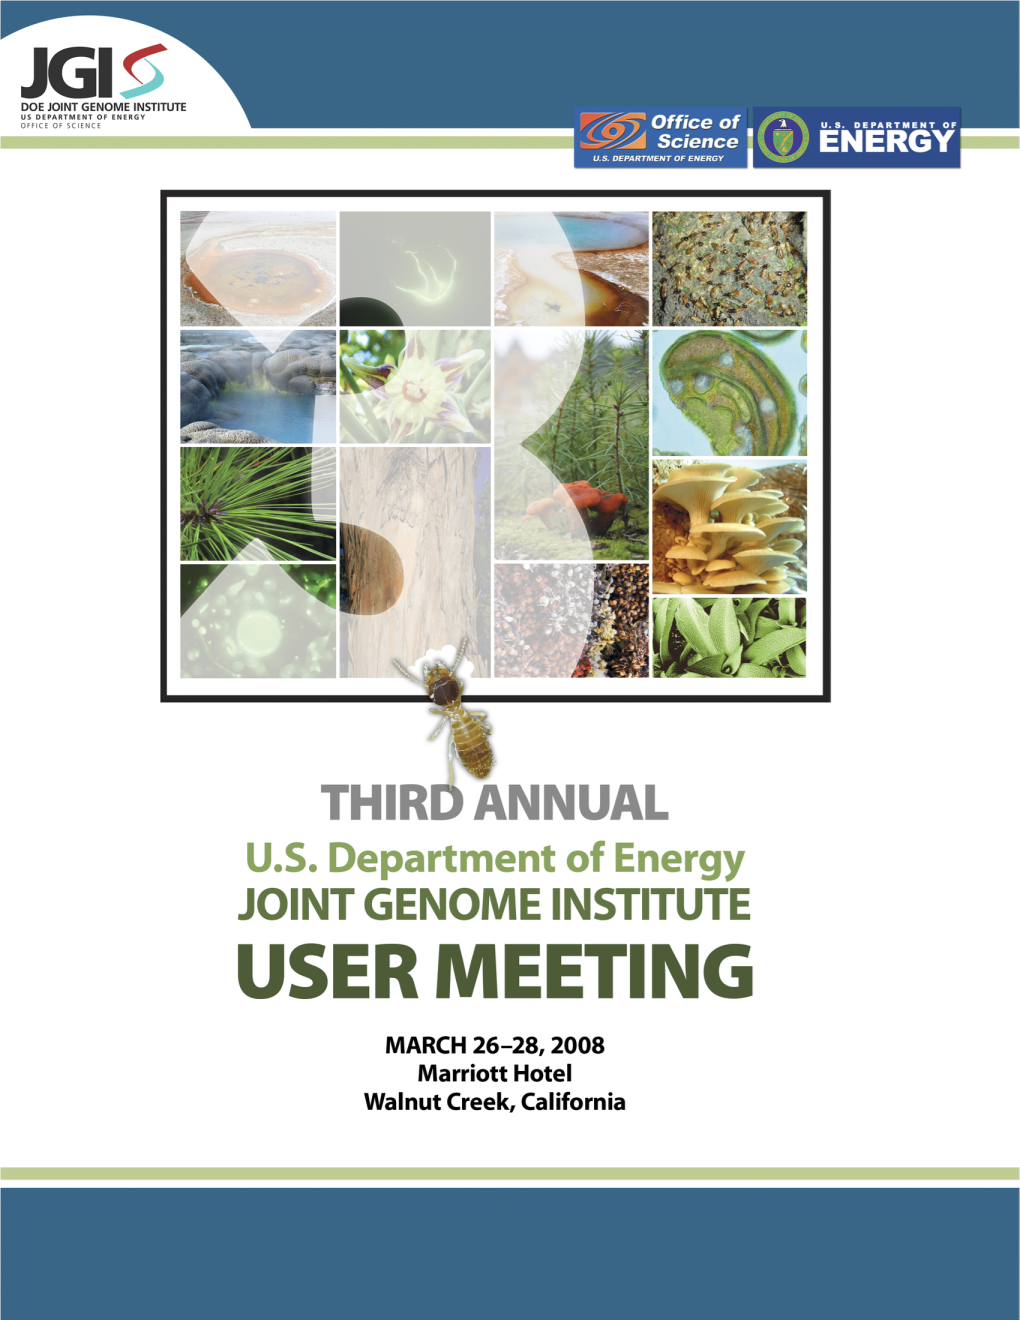 Third Annual DOE Joint Genome Institute User Meeting